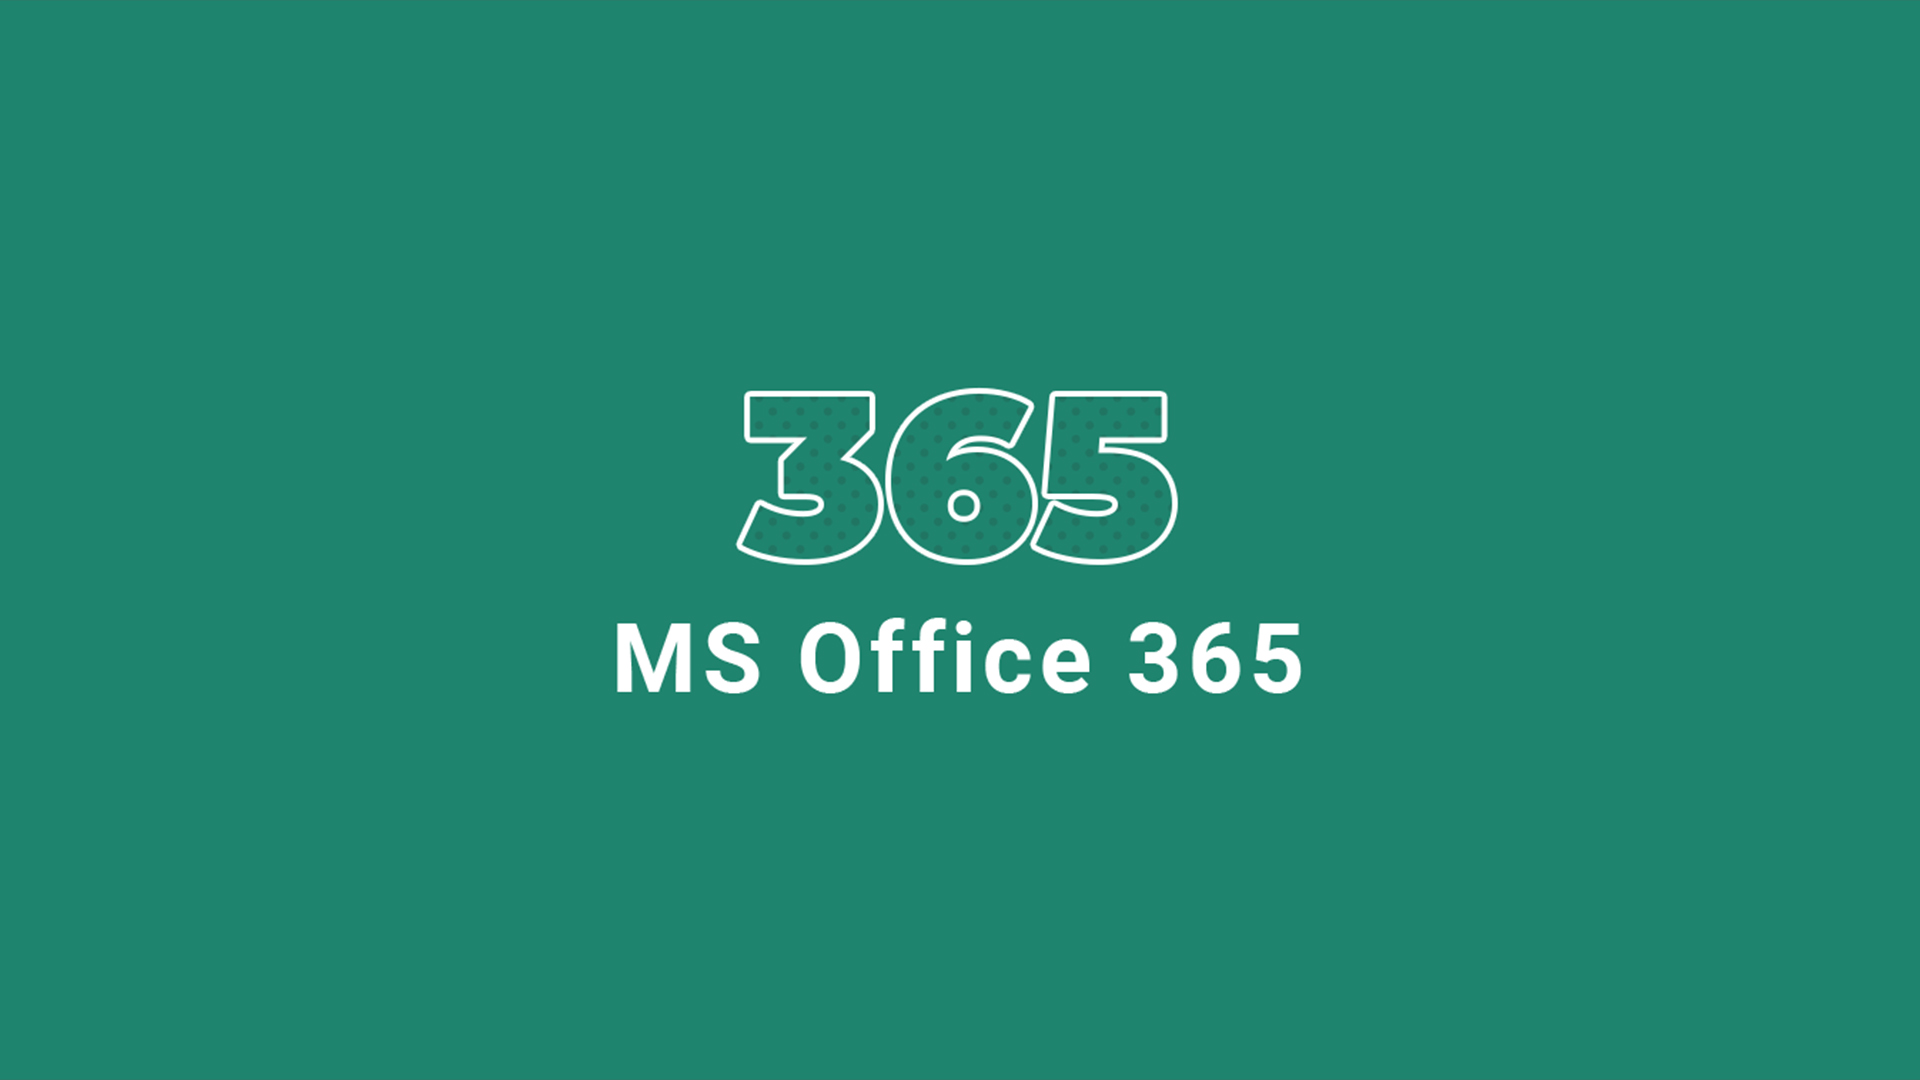 MS Office 365 Family Key (6 Months / 6 Devices) 56.49 $